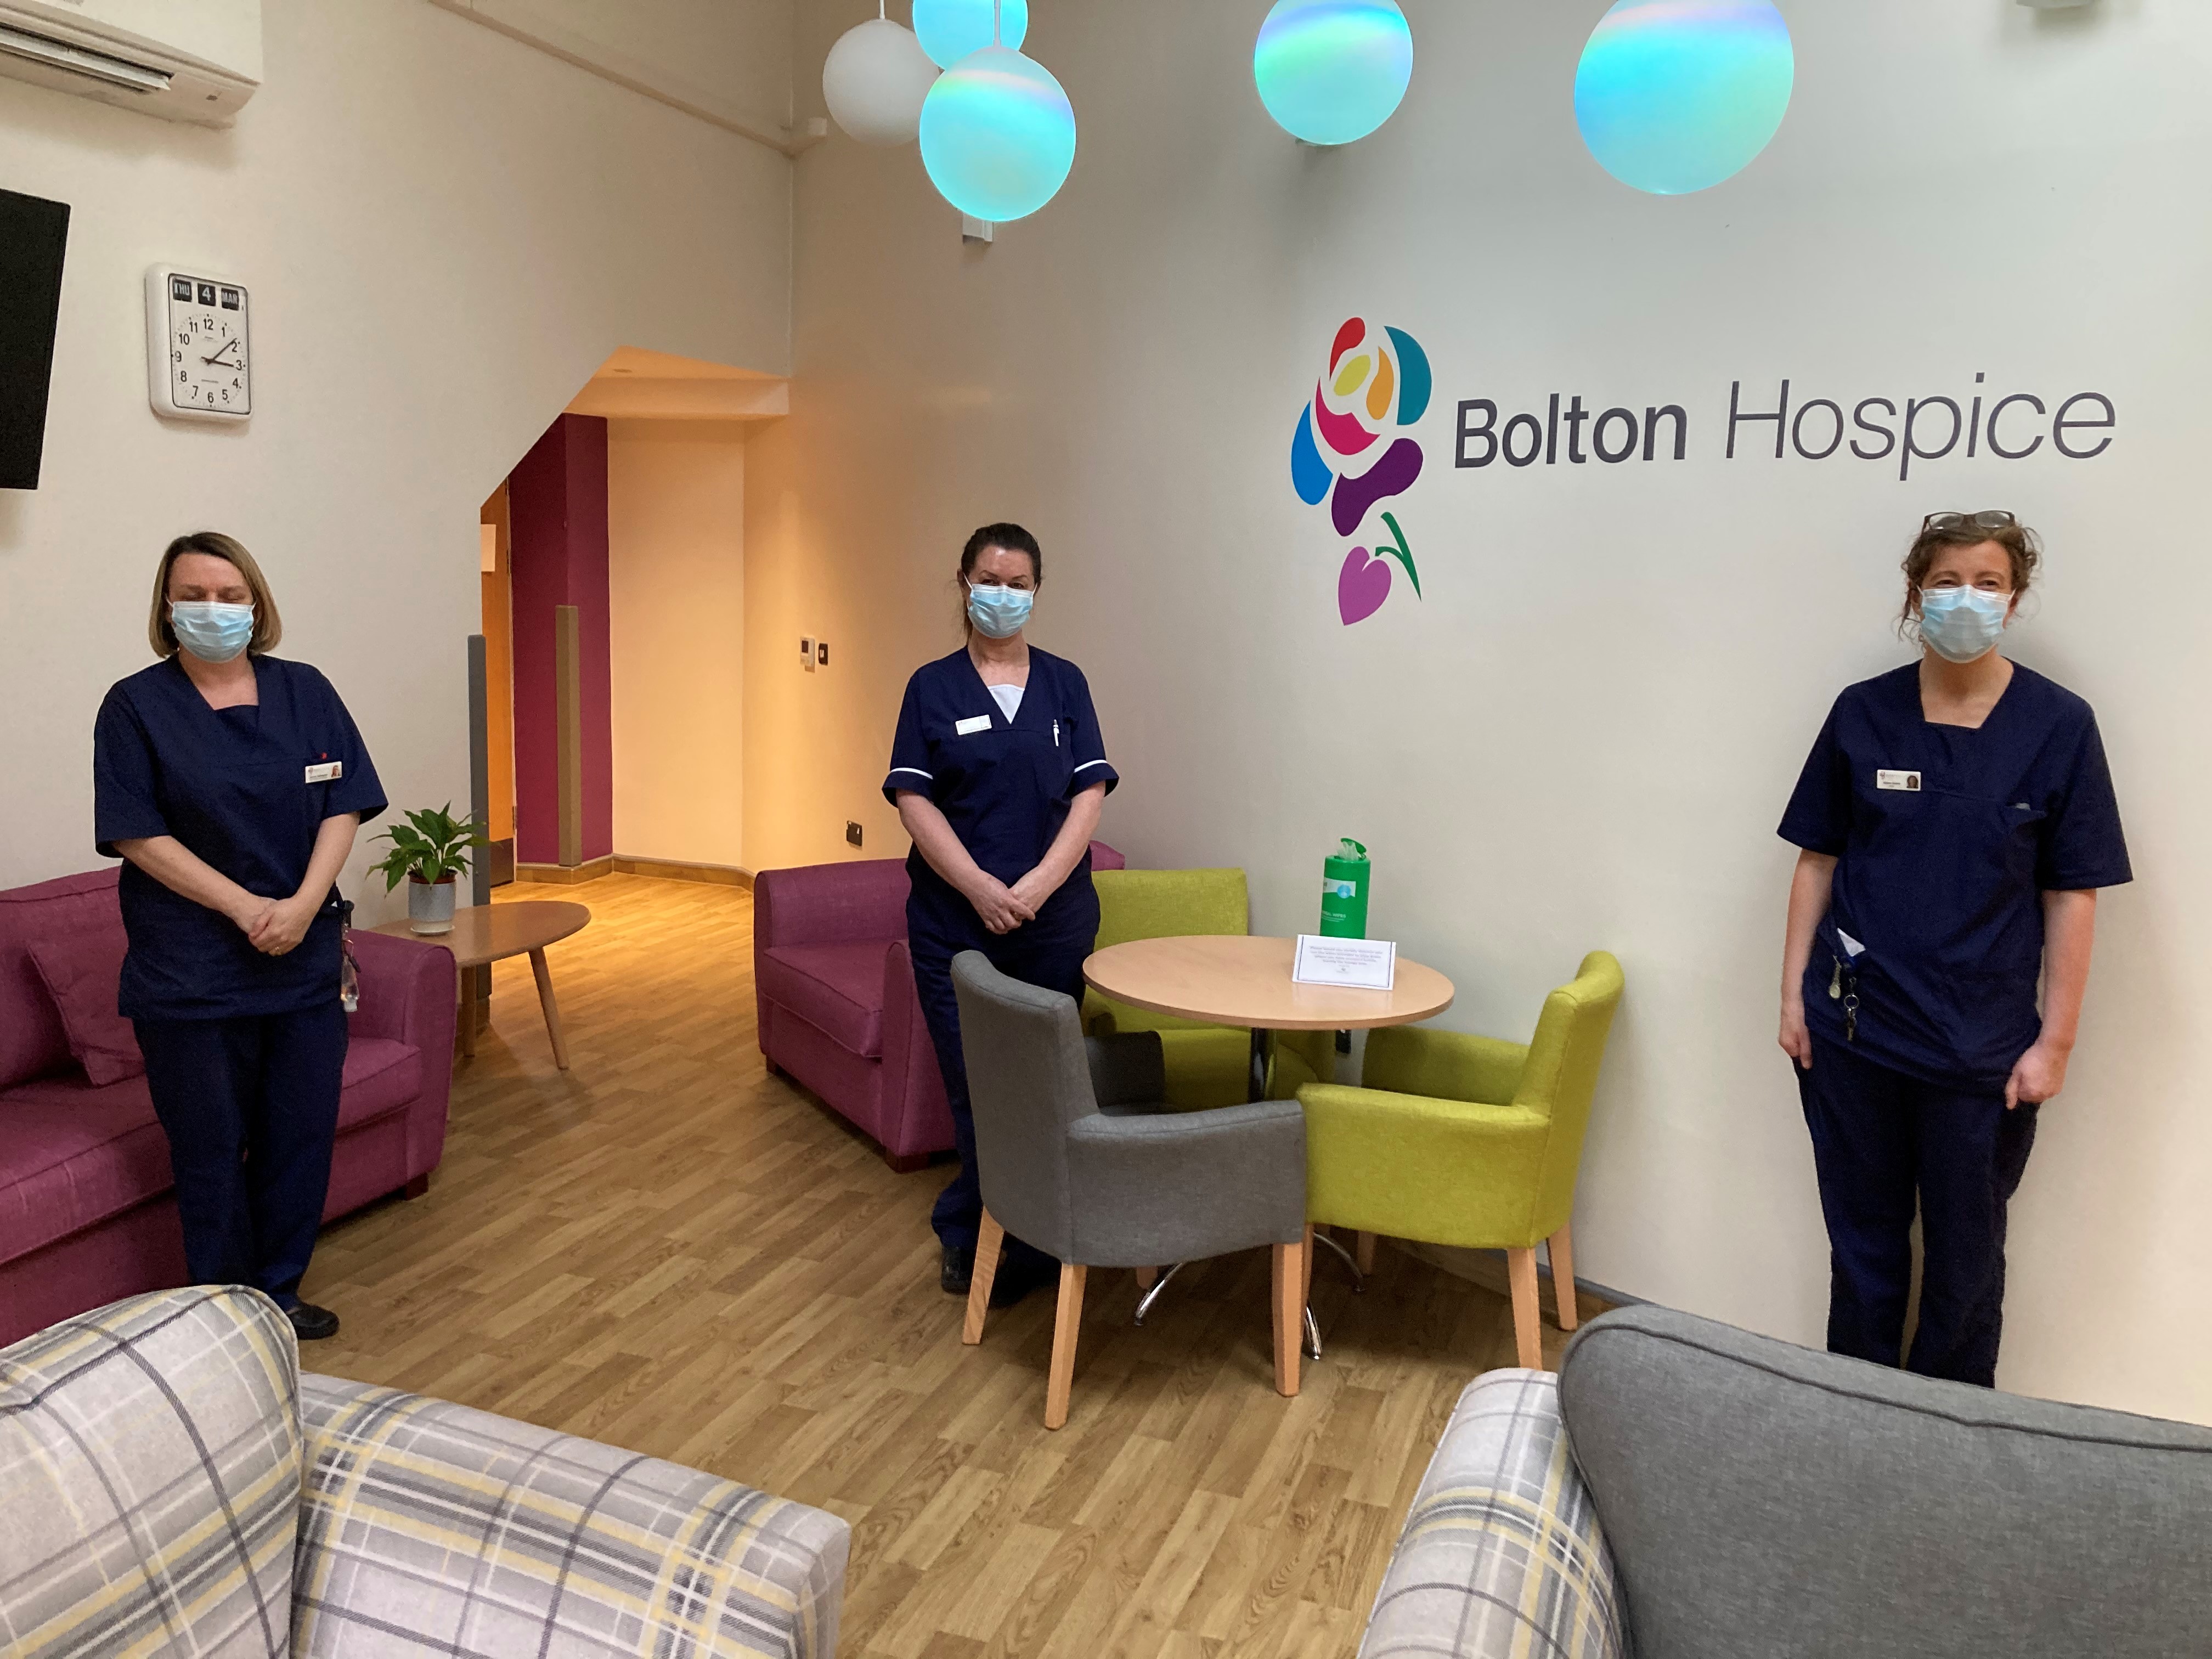 Anglea along with other members of Bolton Hospice staff helped the Bolton COVID-19 vaccination efforts in March 2021, working with colleagues in healthcare across Bolton to support them in vaccinating members of the local community.